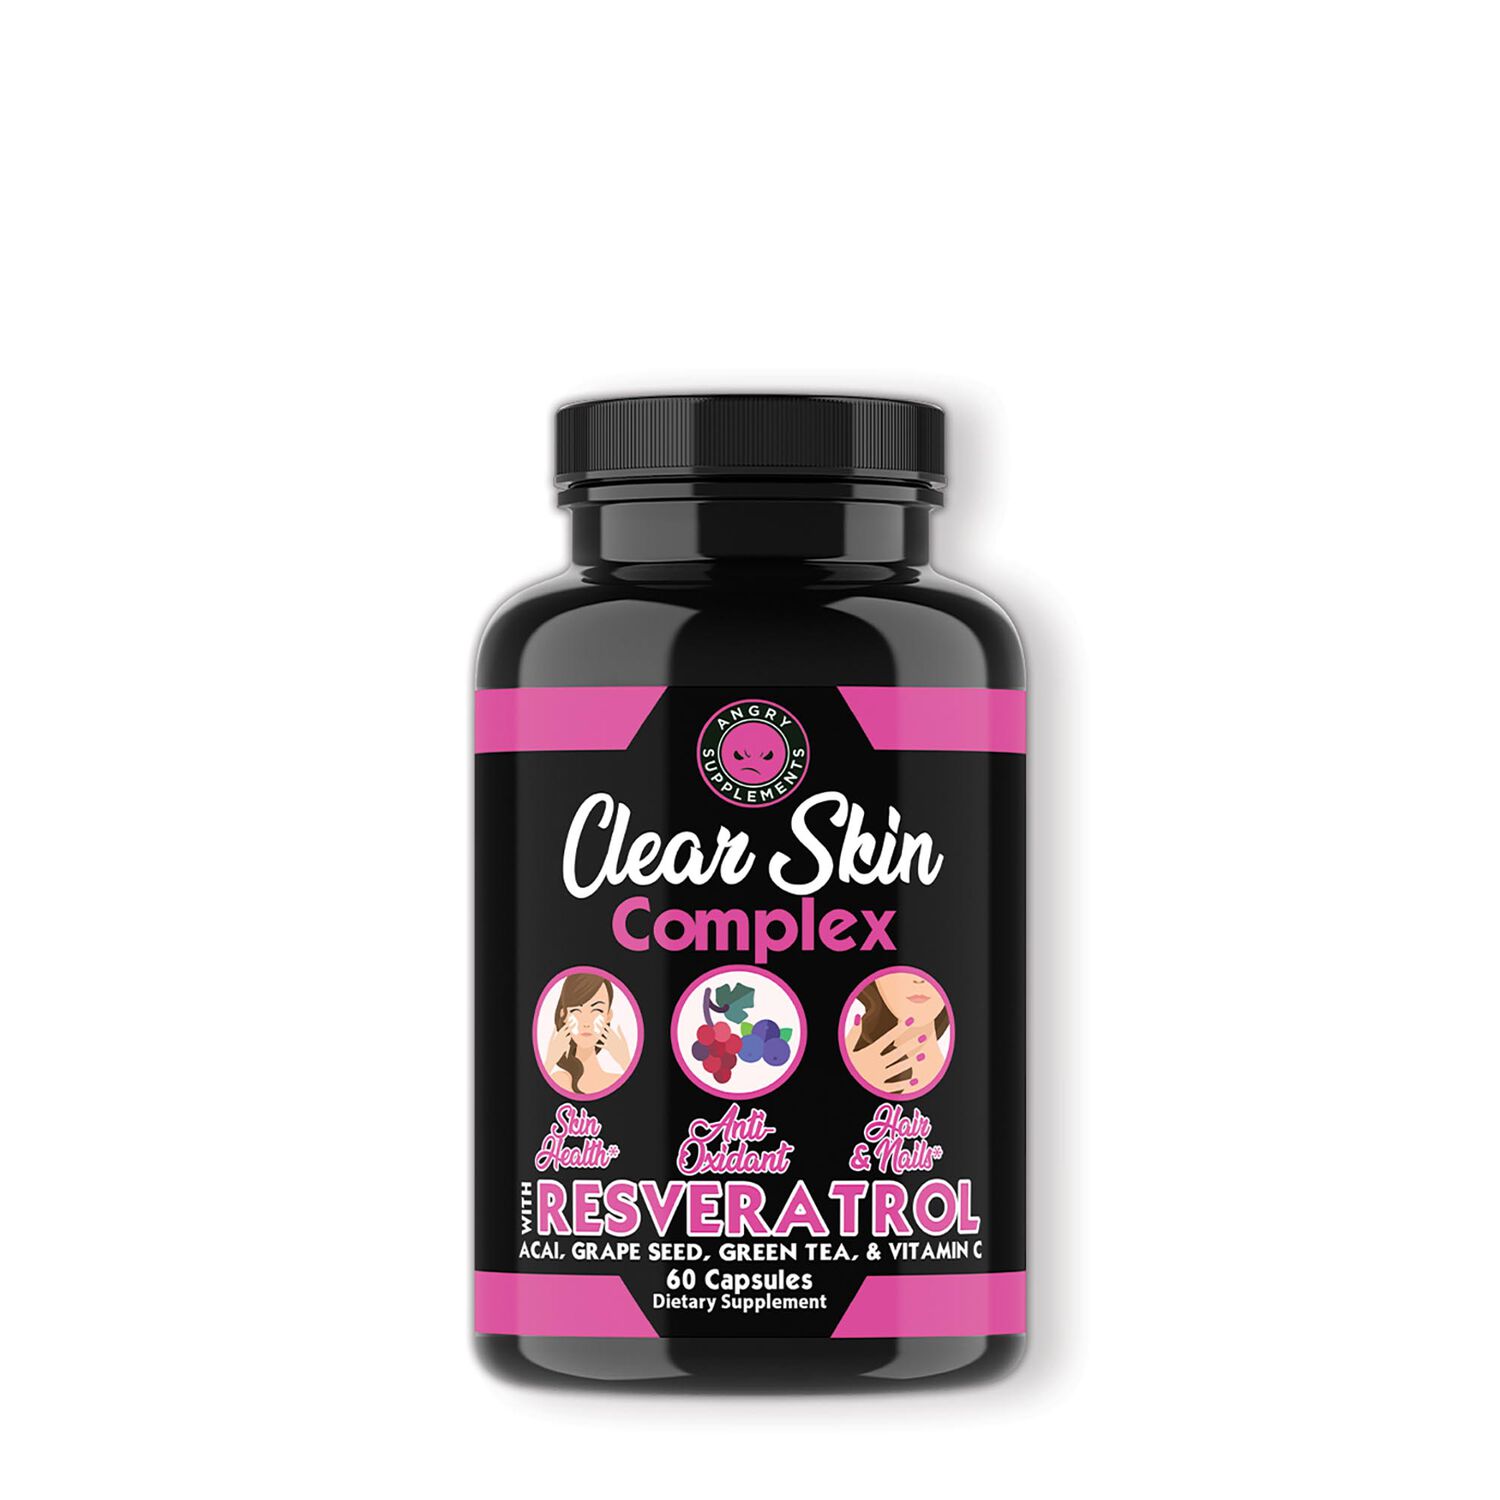 Angry Supplements Clear Skin Complex - Resveratrol - 60 Capsules (30 Servings)